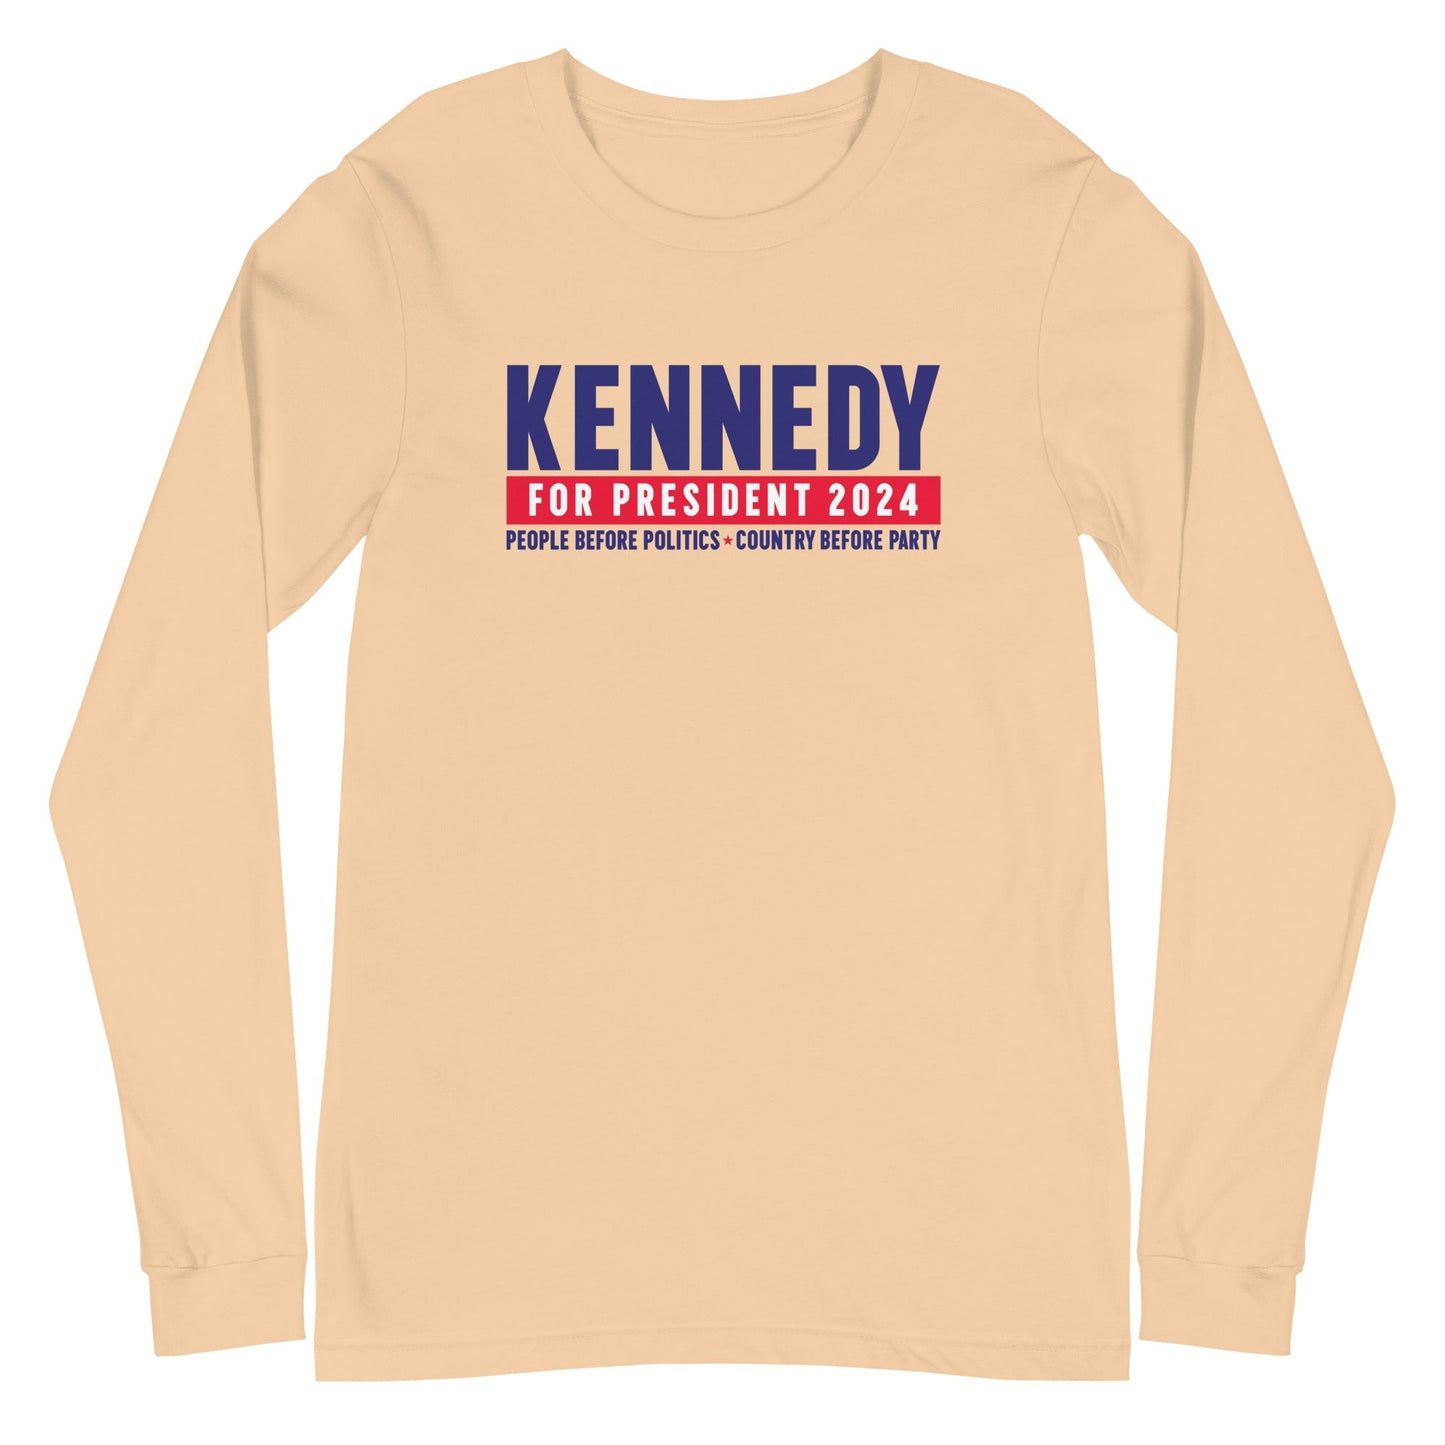 Kennedy for the People Unisex Long Sleeve Tee - TEAM KENNEDY. All rights reserved